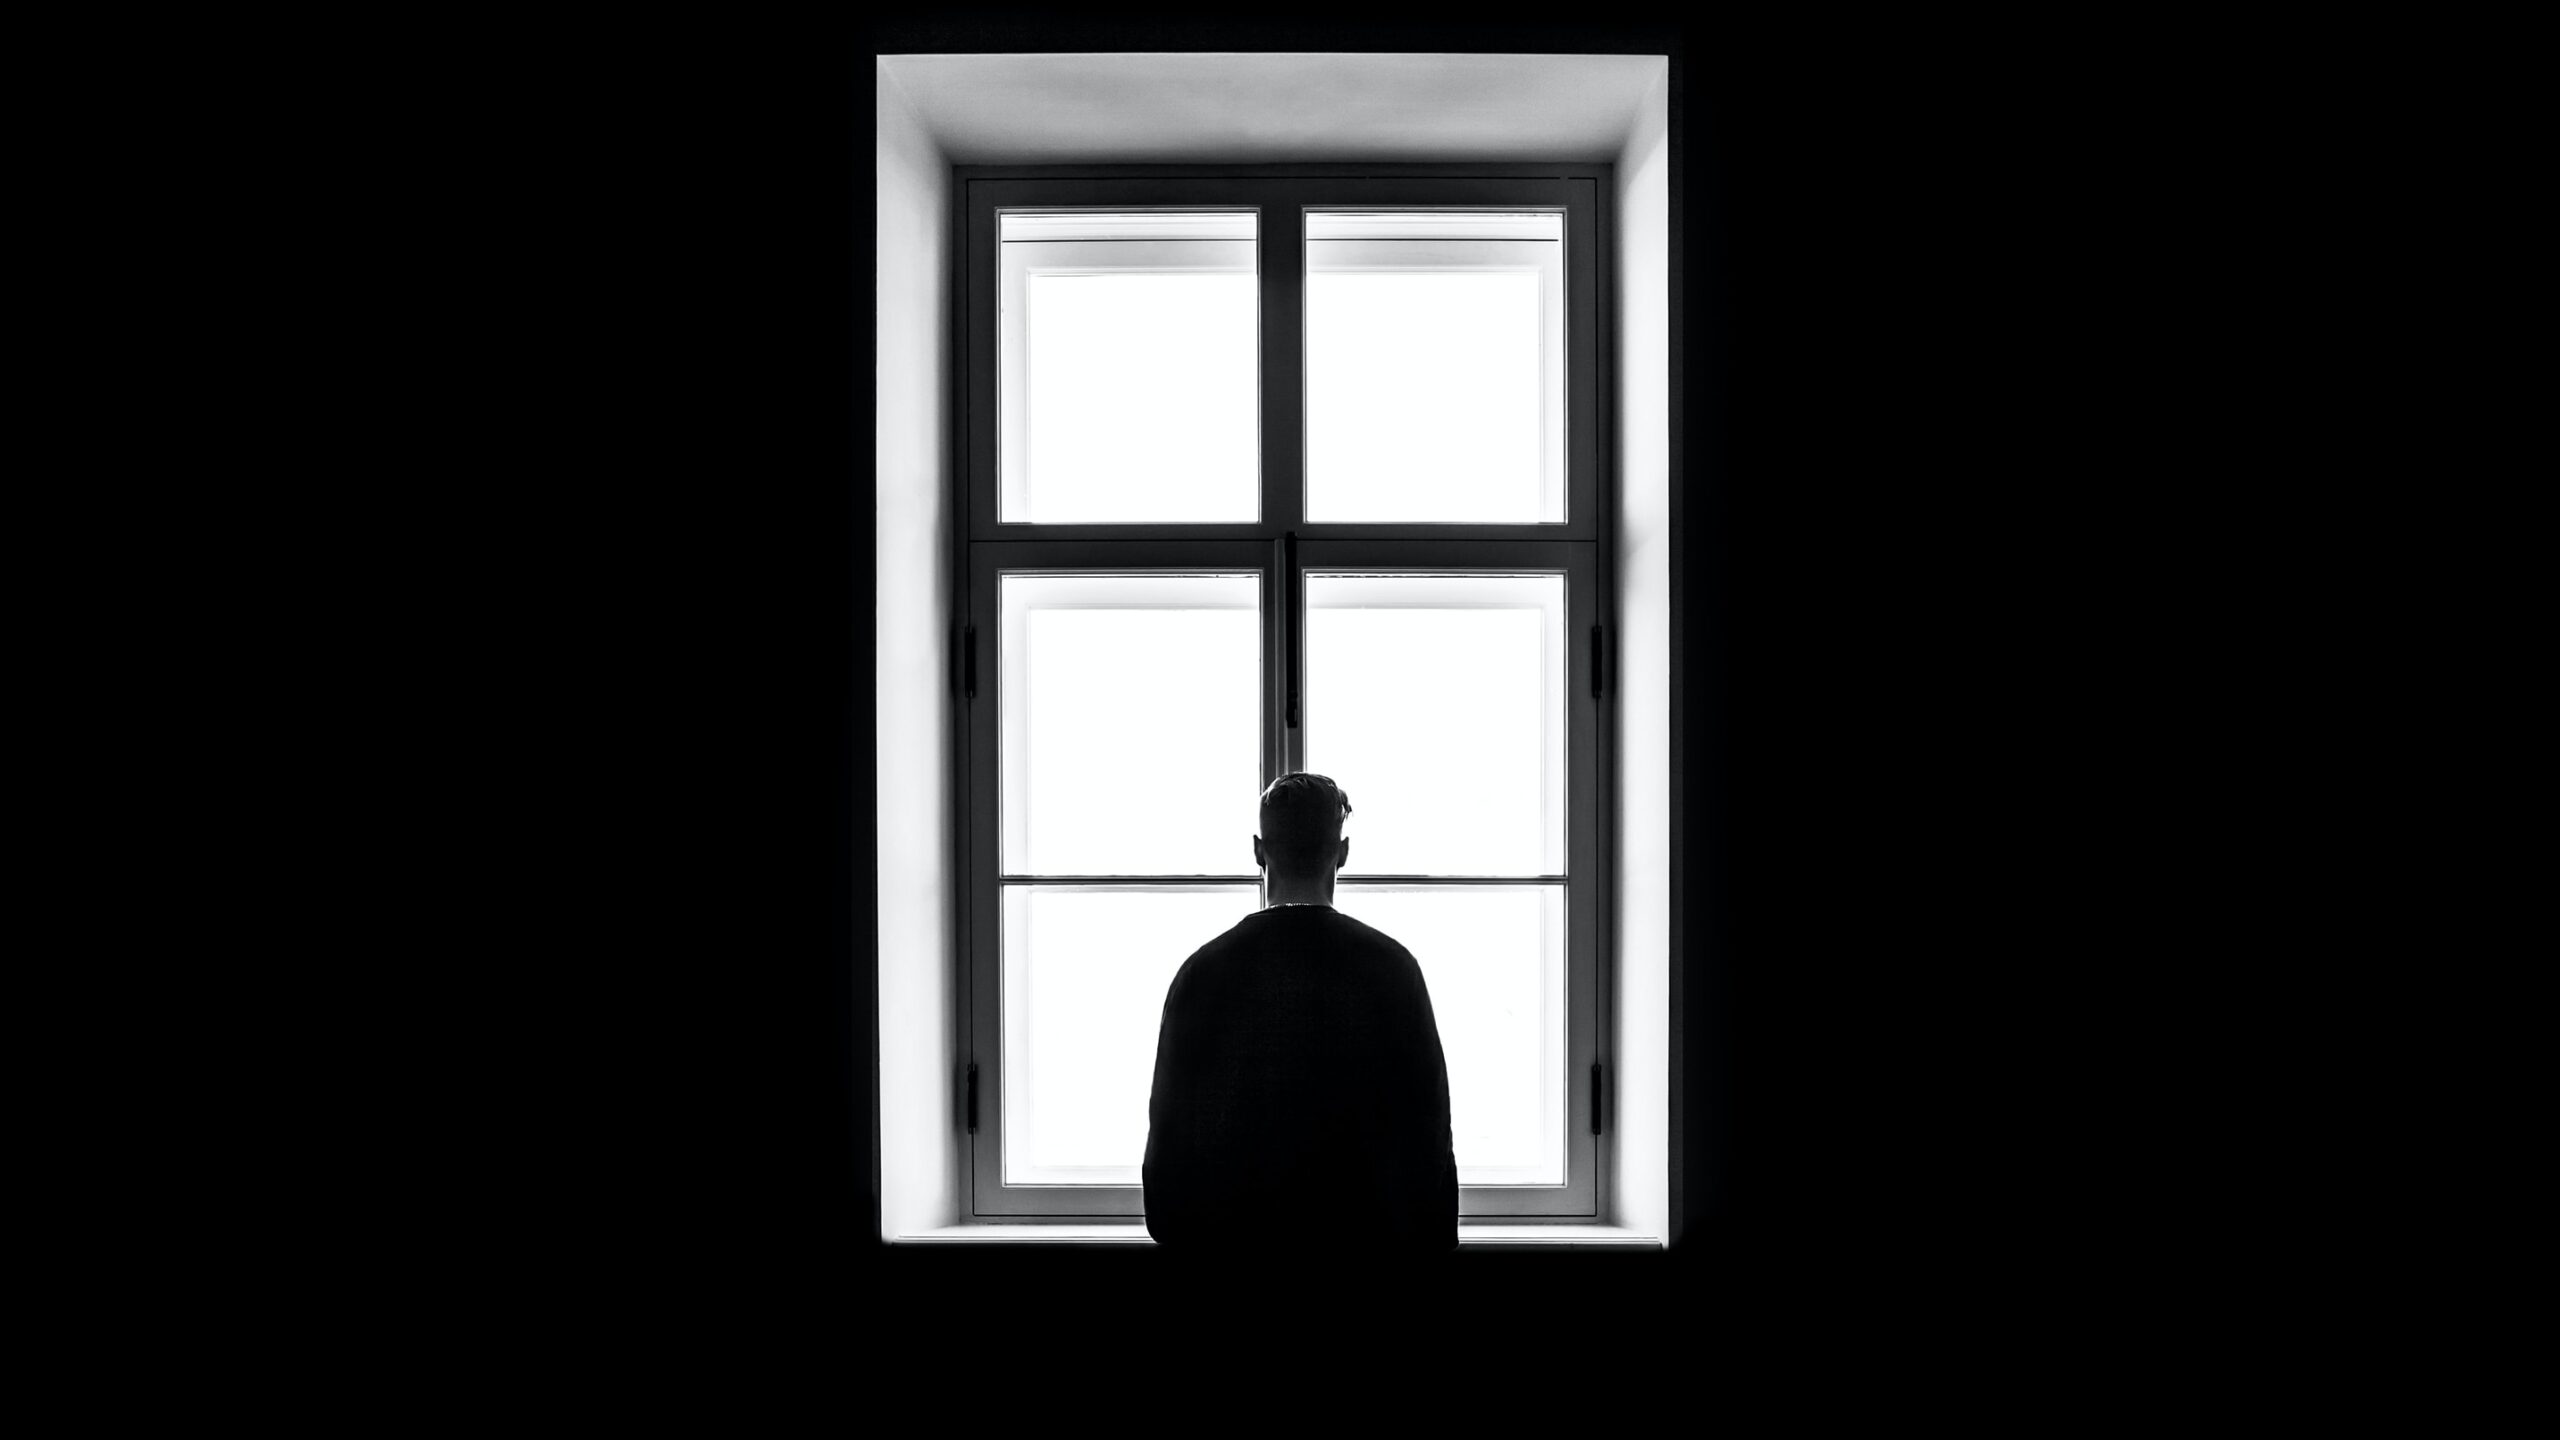 silhouette of man in window in black and white